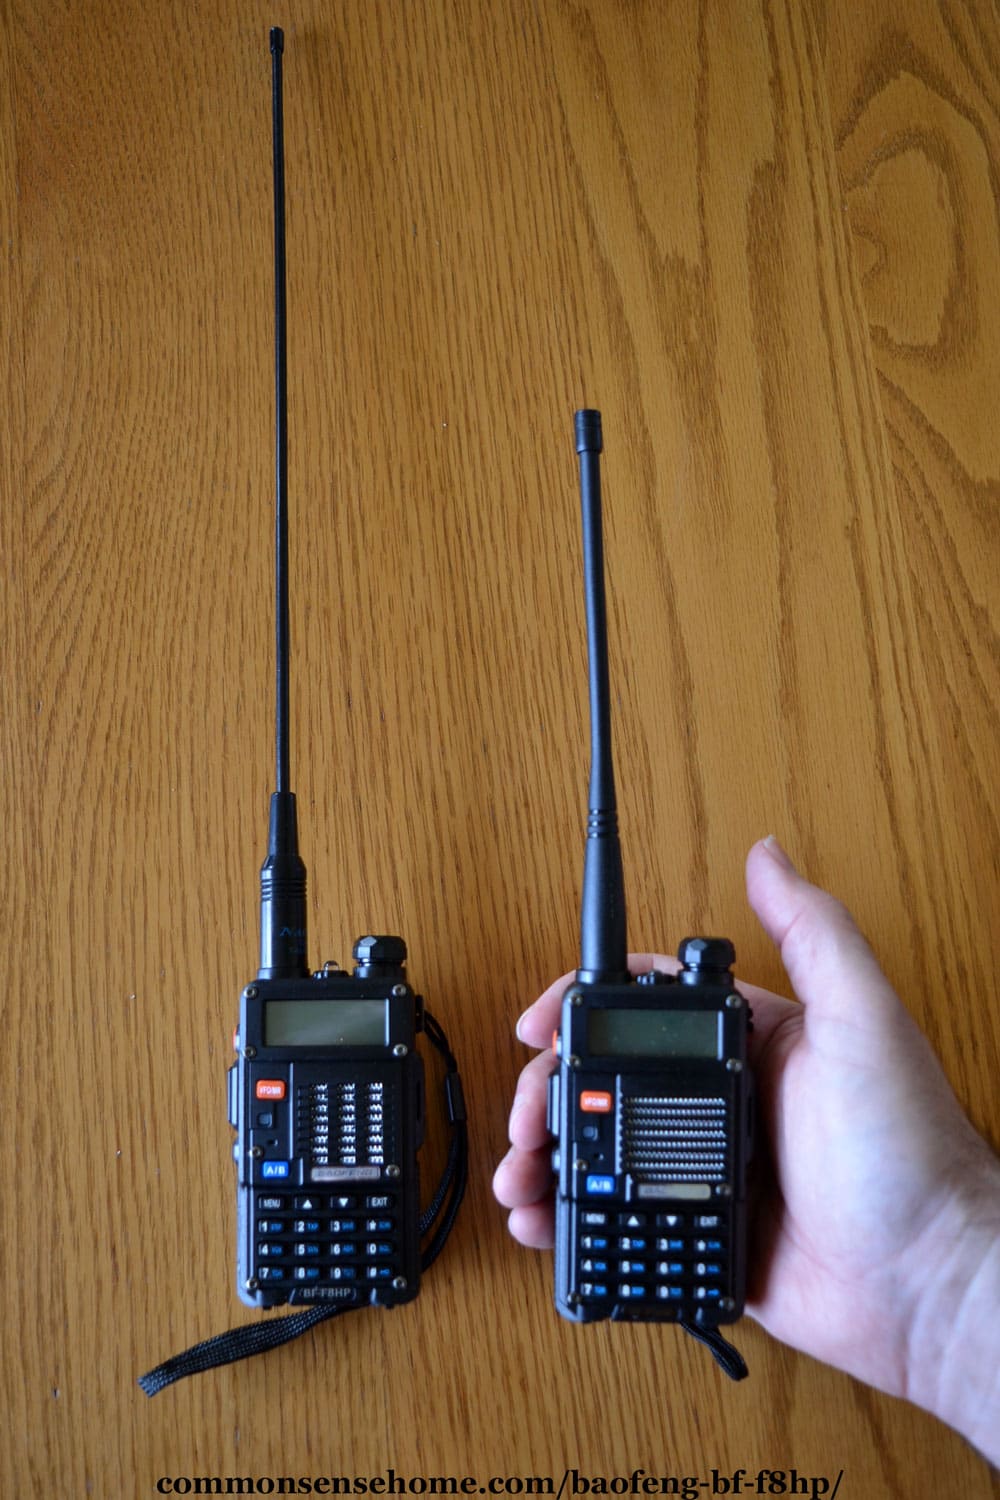 BAOFENG BF-F8HP with and without Nagoya whip antenna